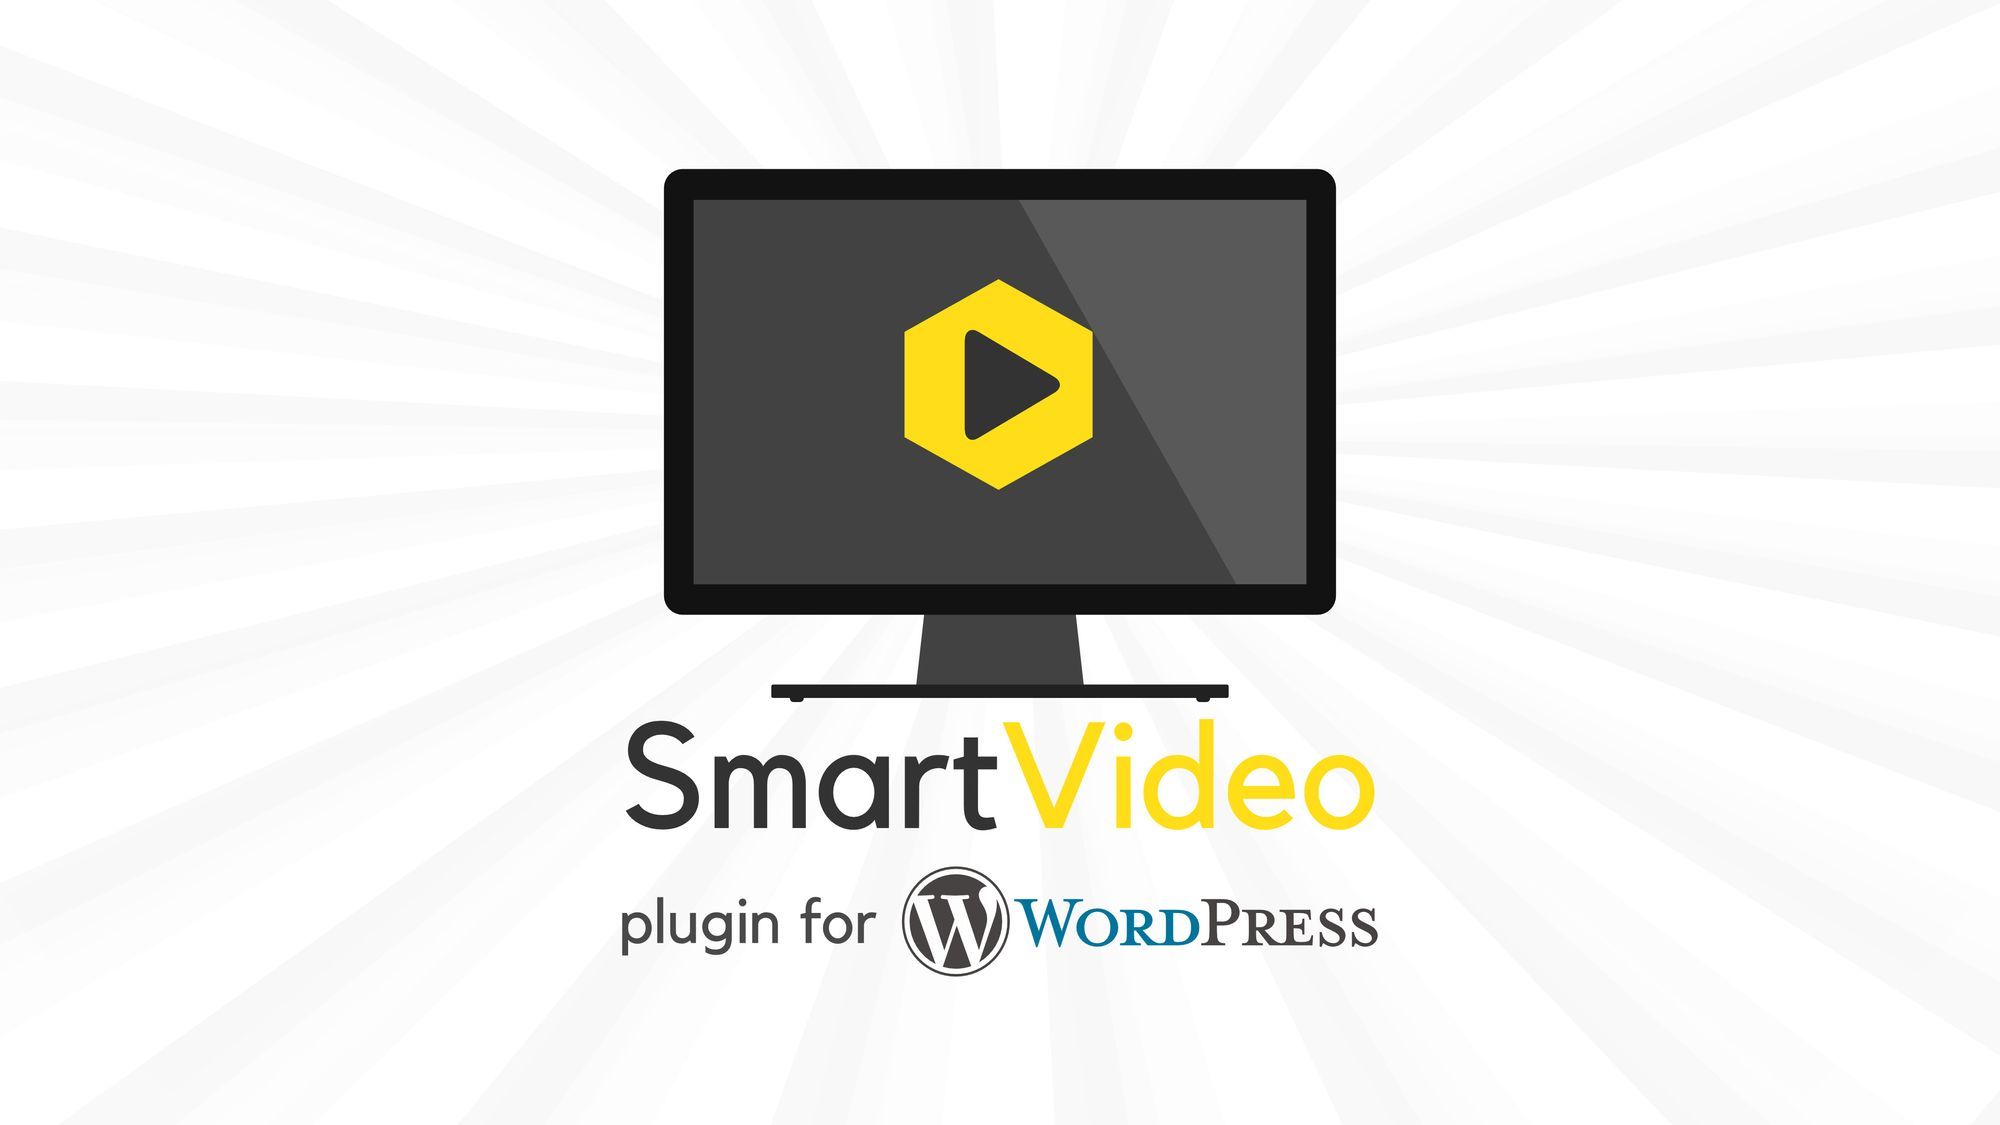 Say hello to the SmartVideo plugin for WordPress 🎉